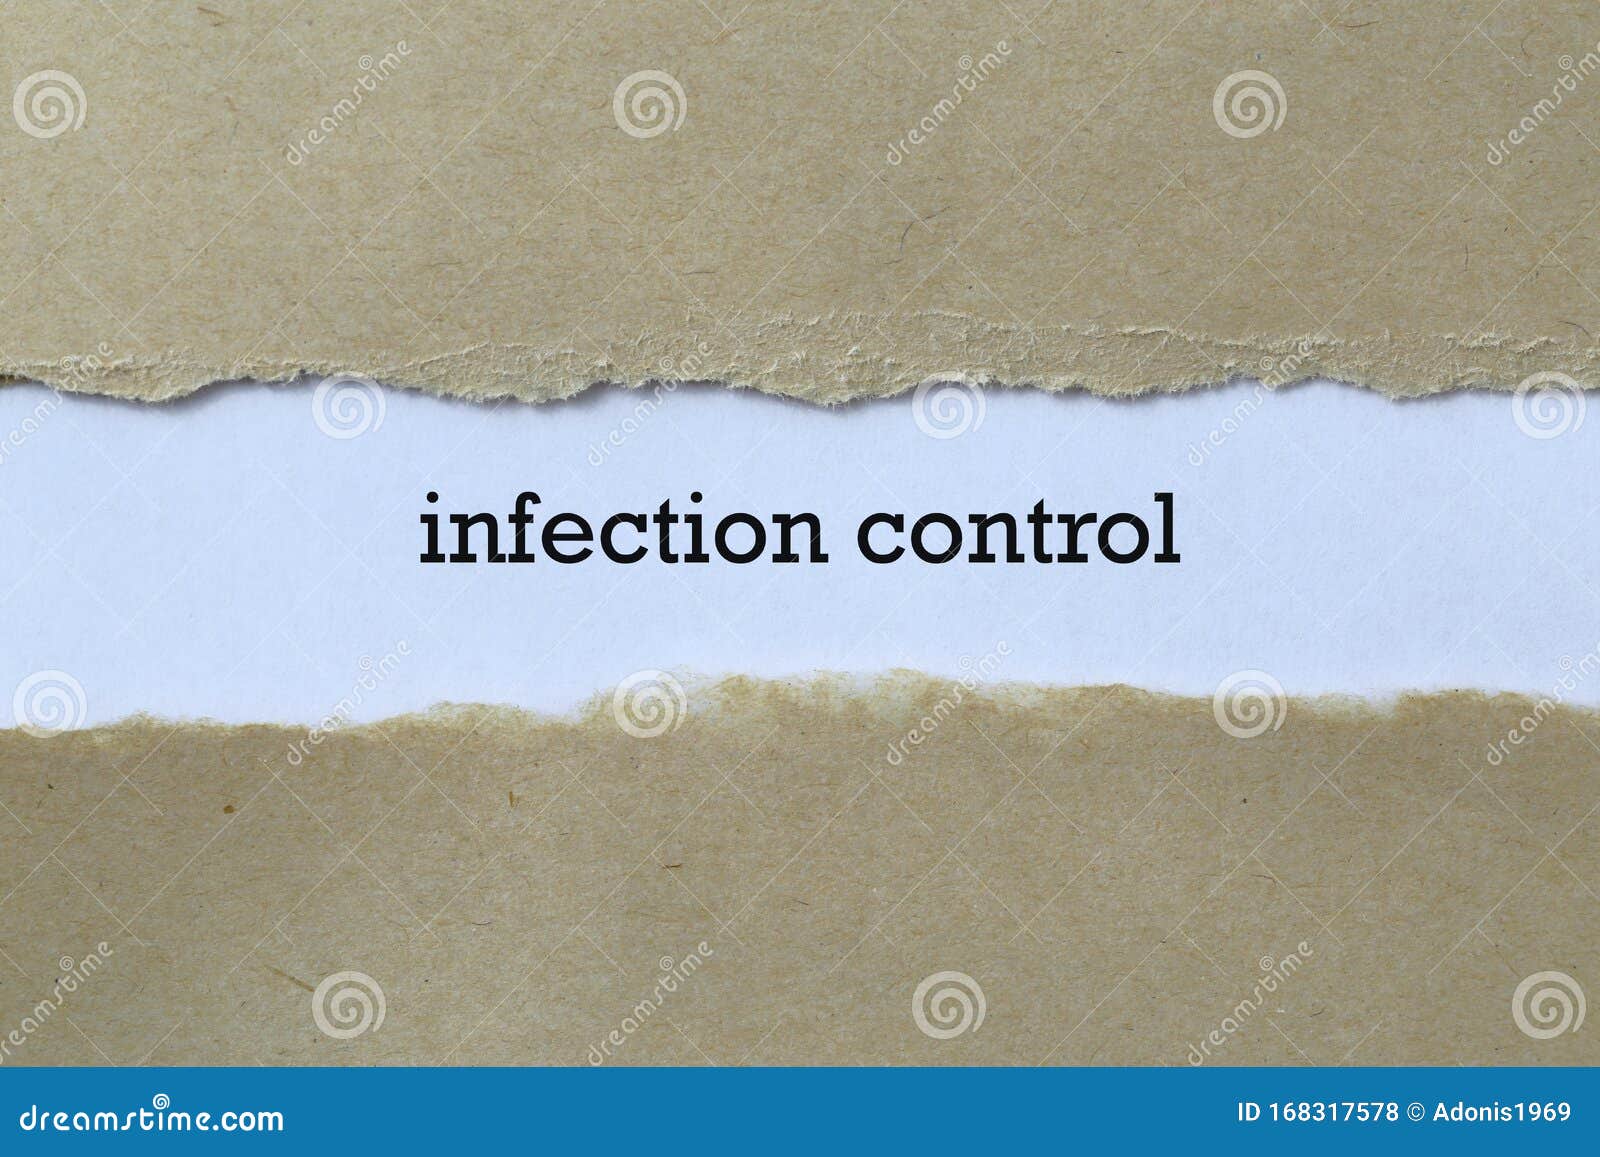 infection control on paper